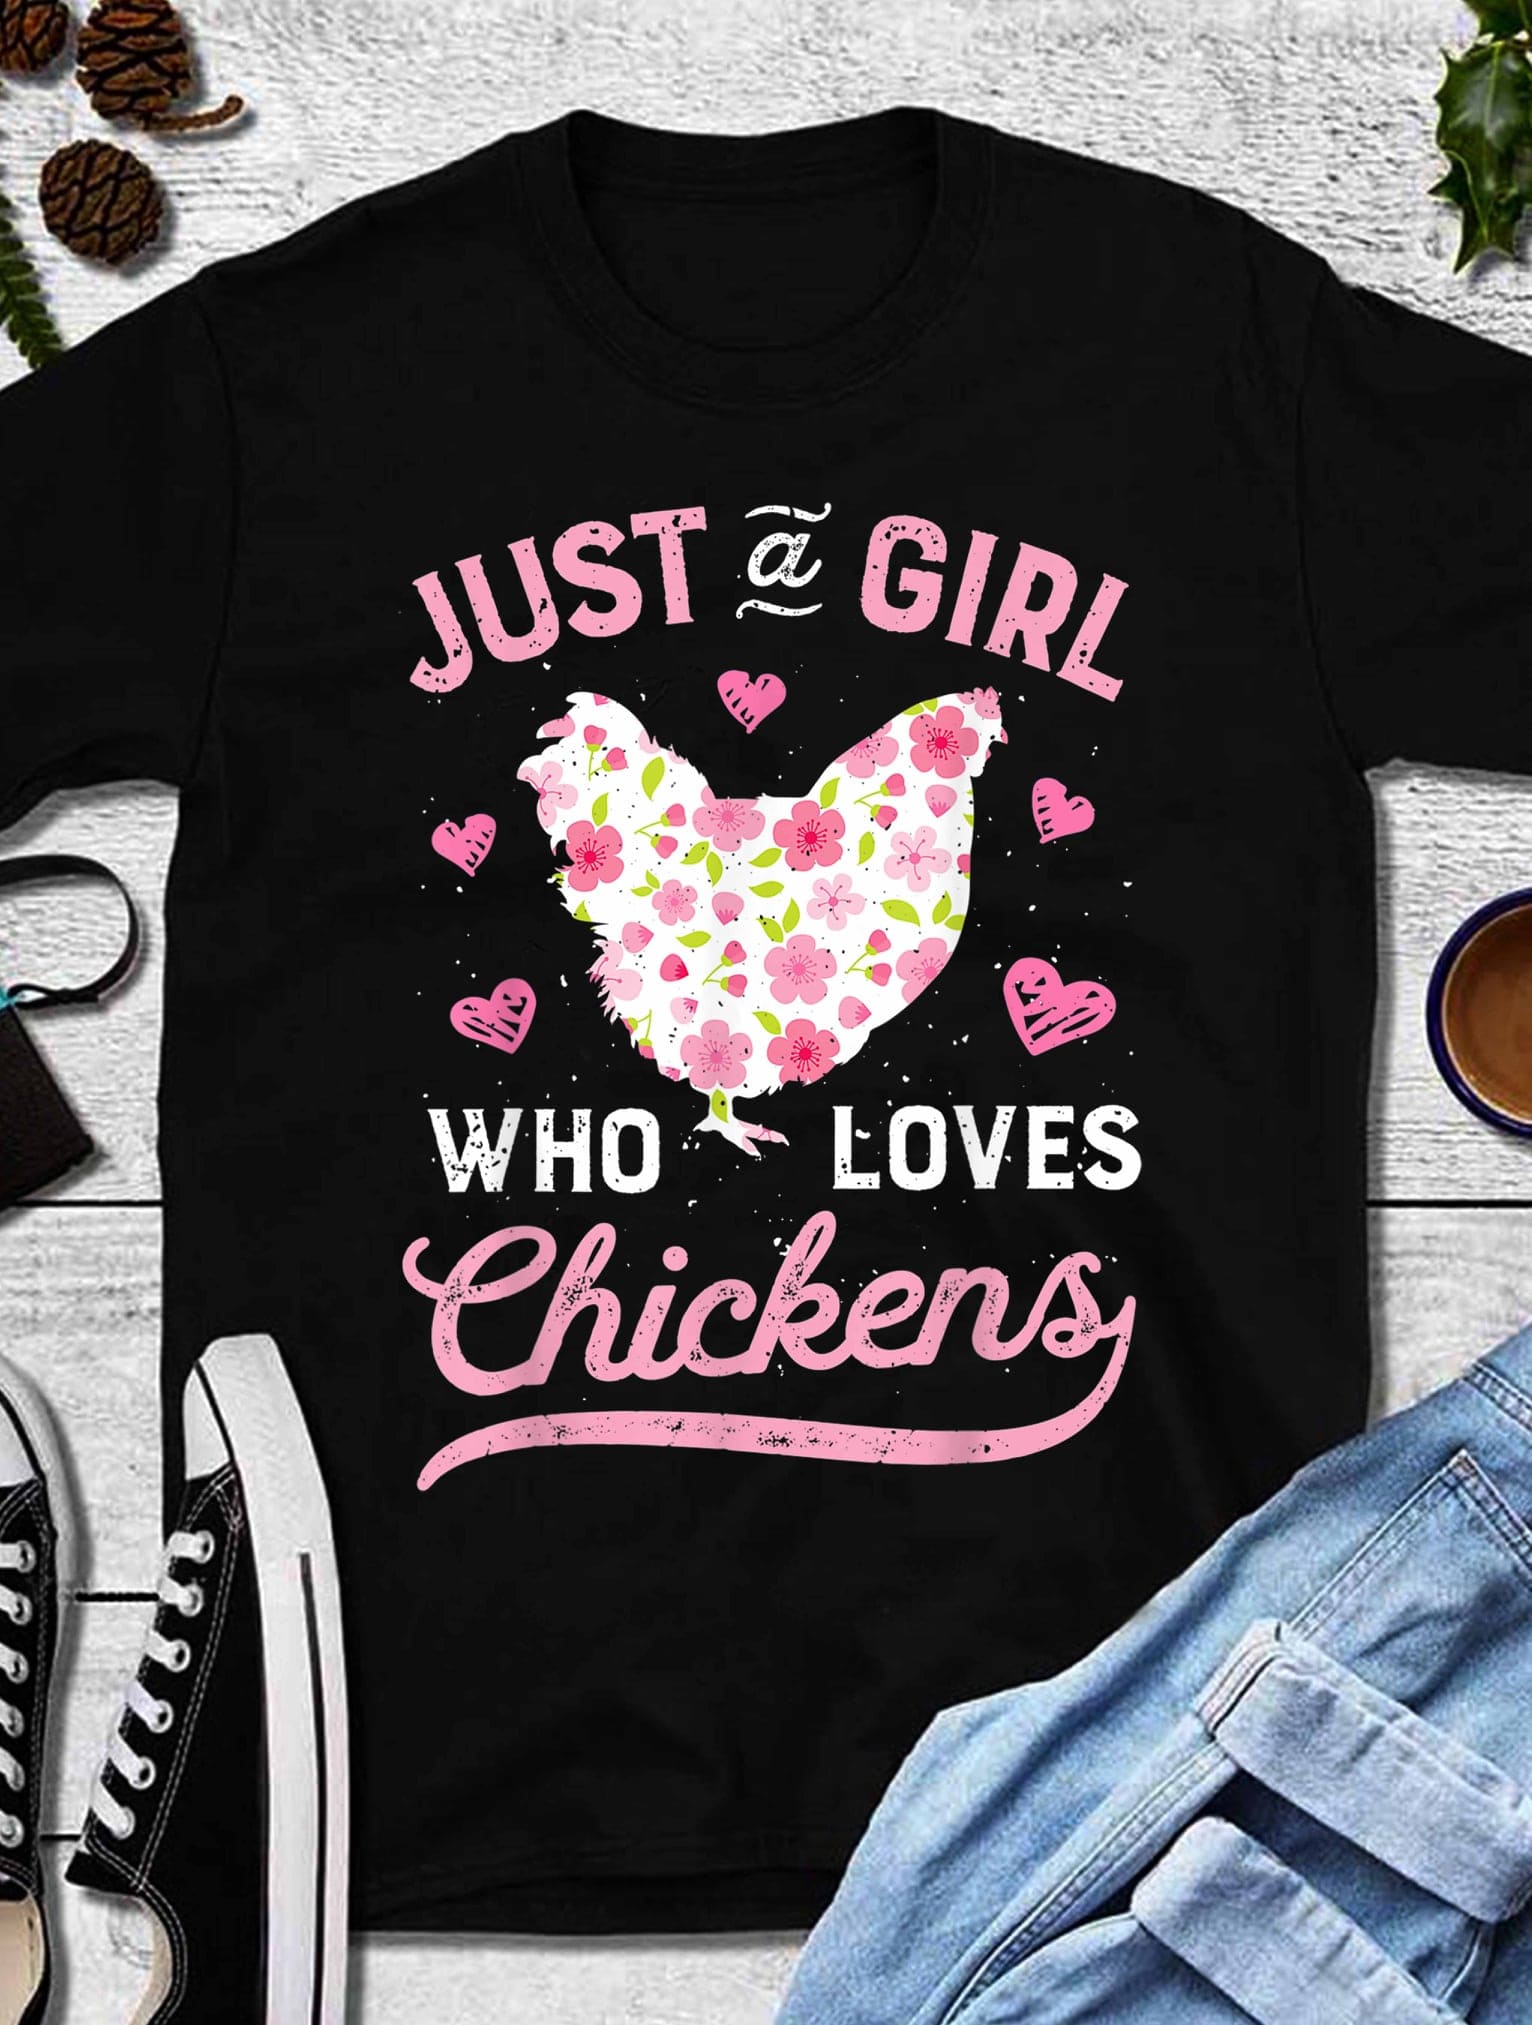 Just A Girl Who Loves Chickens T For Chicken Person Floral Chicken Graphic T Shirt Shirt